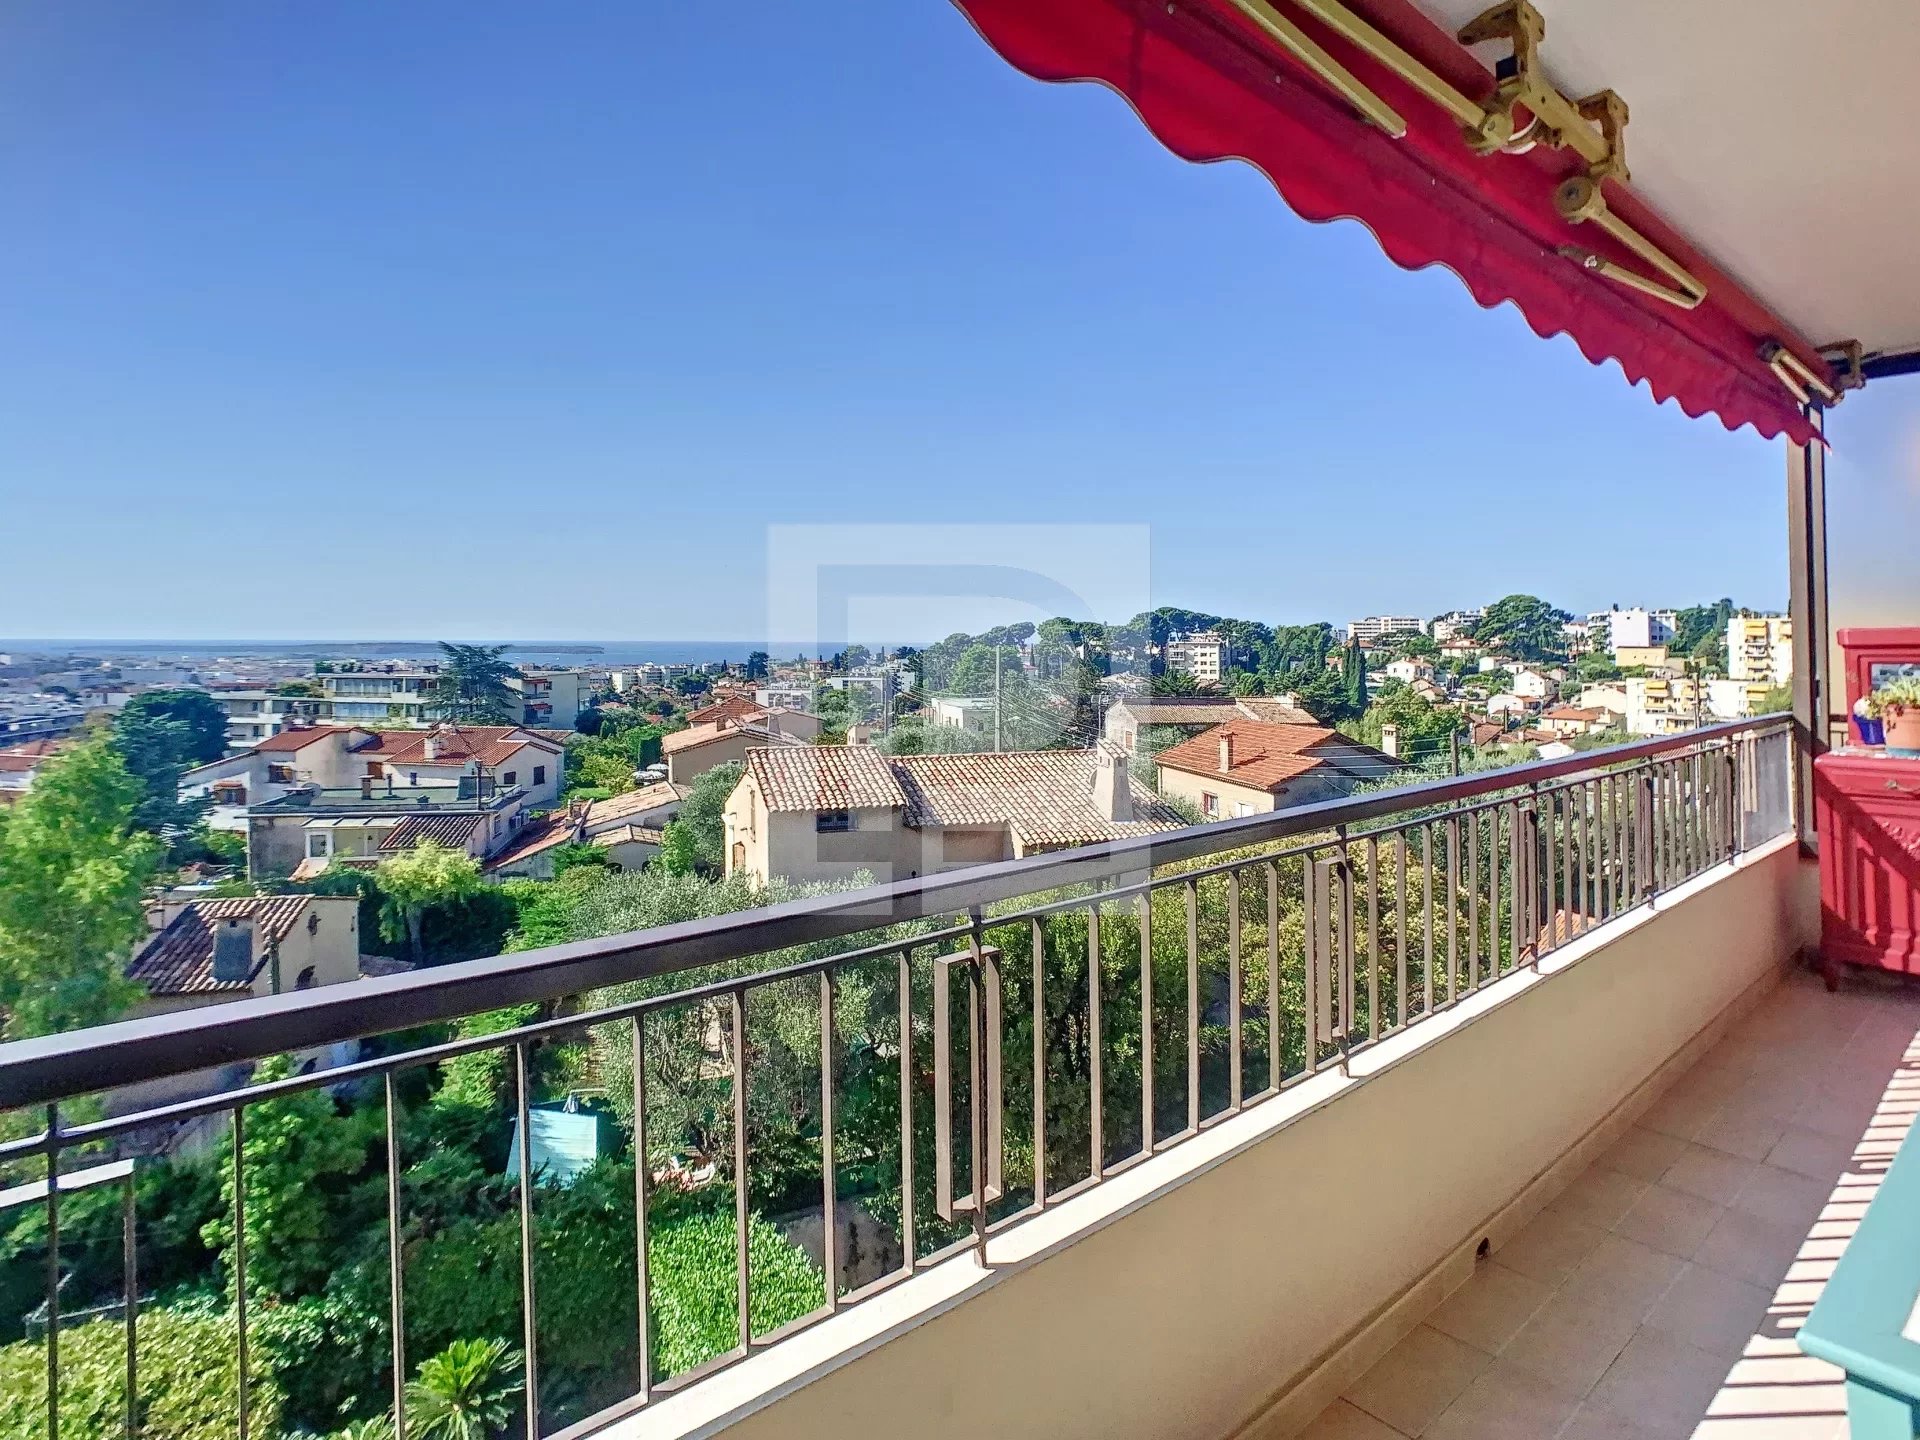 Top floor apartment with unobstructed views of the hills and sea